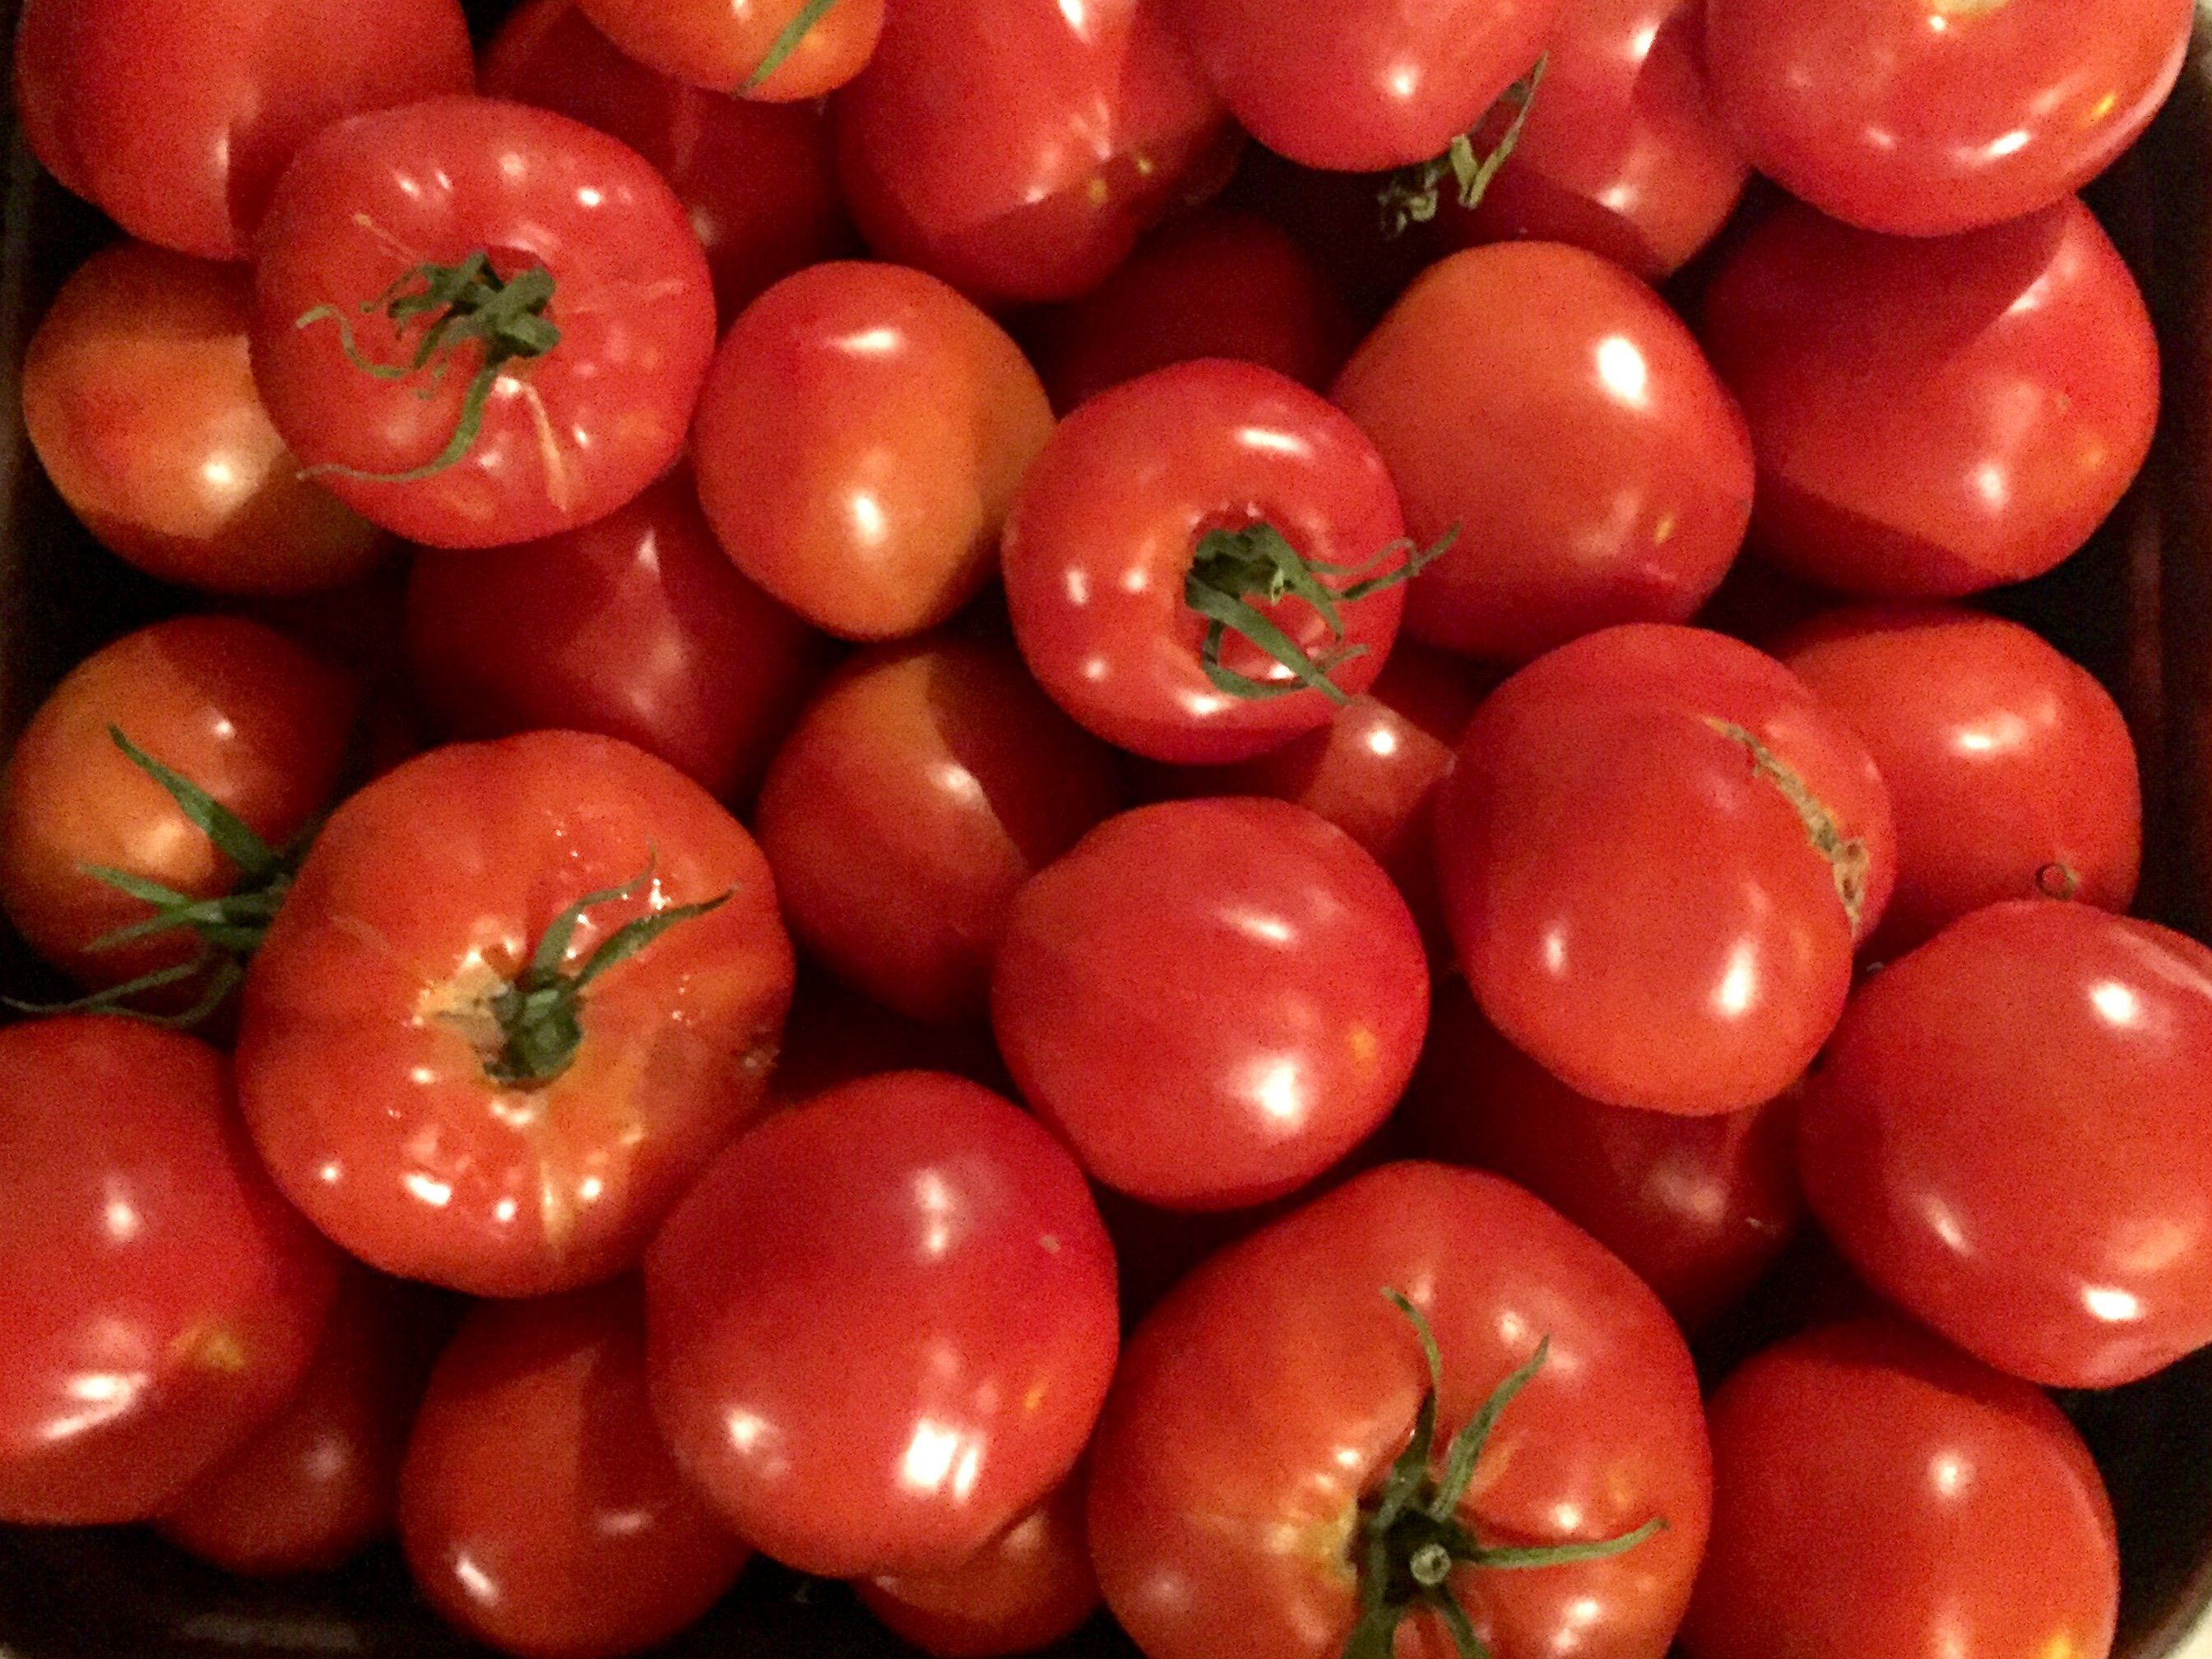 Tomatoes are back for January 25!